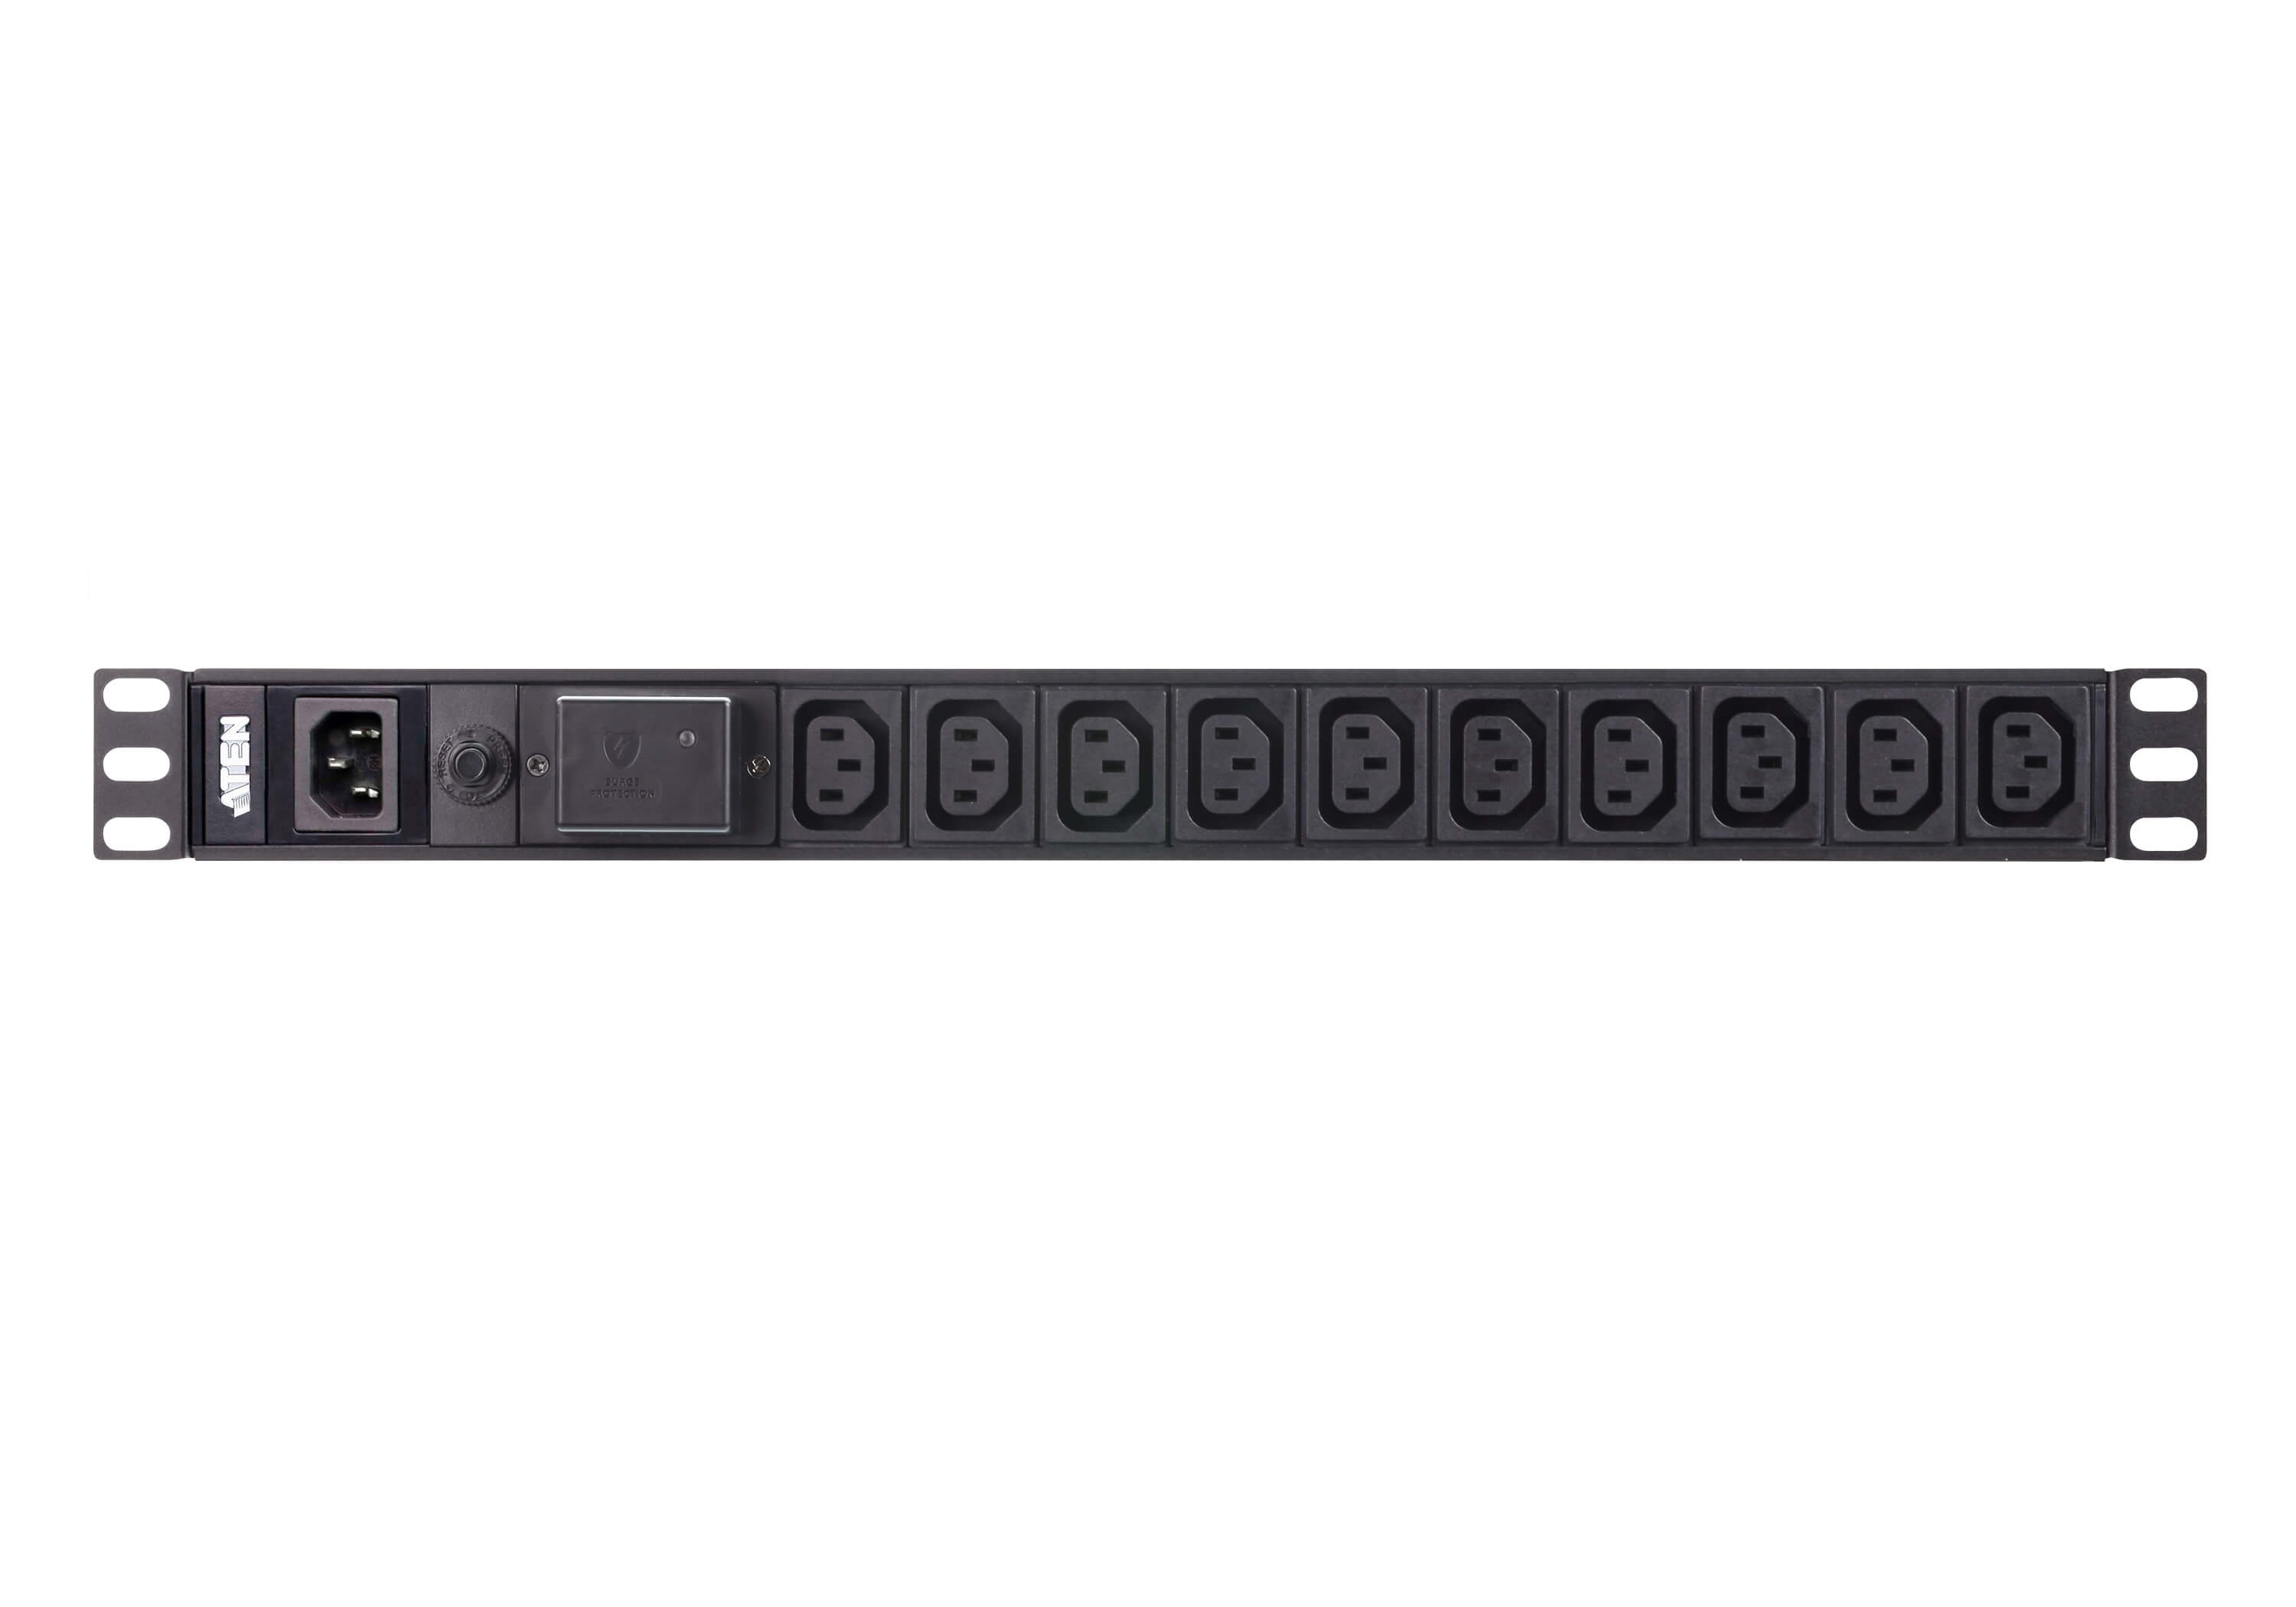 10 OUTLETS 15A BASIC PDU W/ SURGE PROTECTION - 100-240V